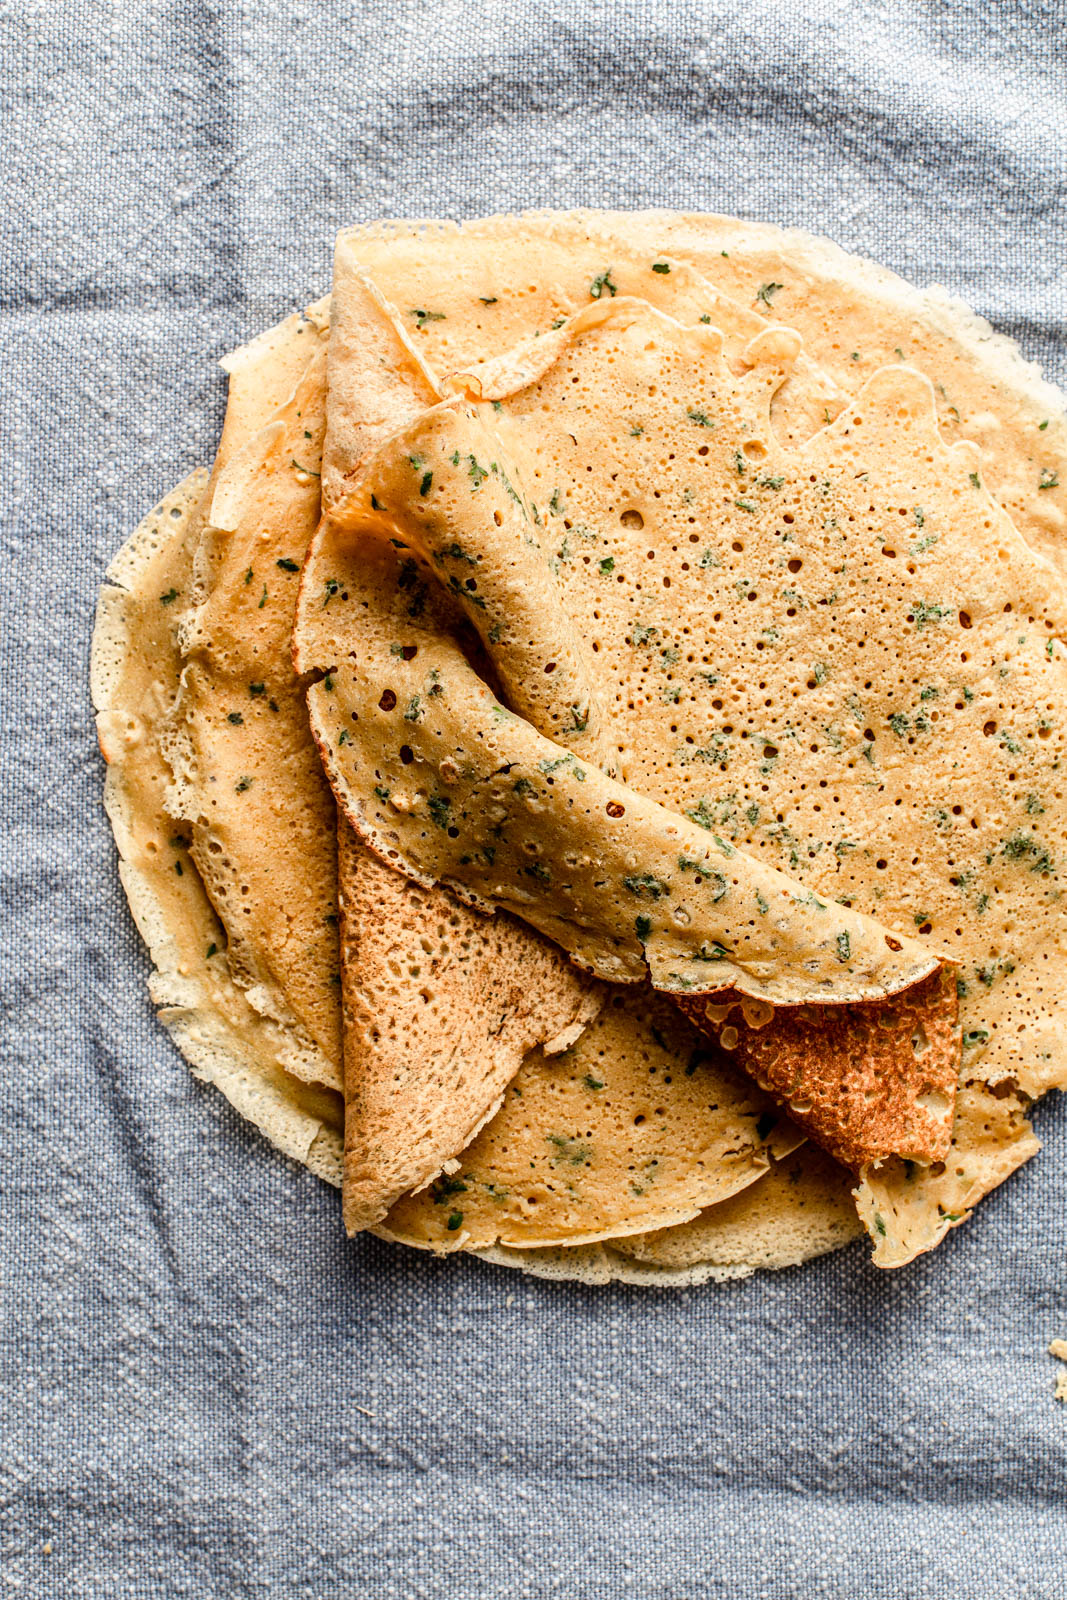 chickpea pancakes with herbs on a blue towel food photography